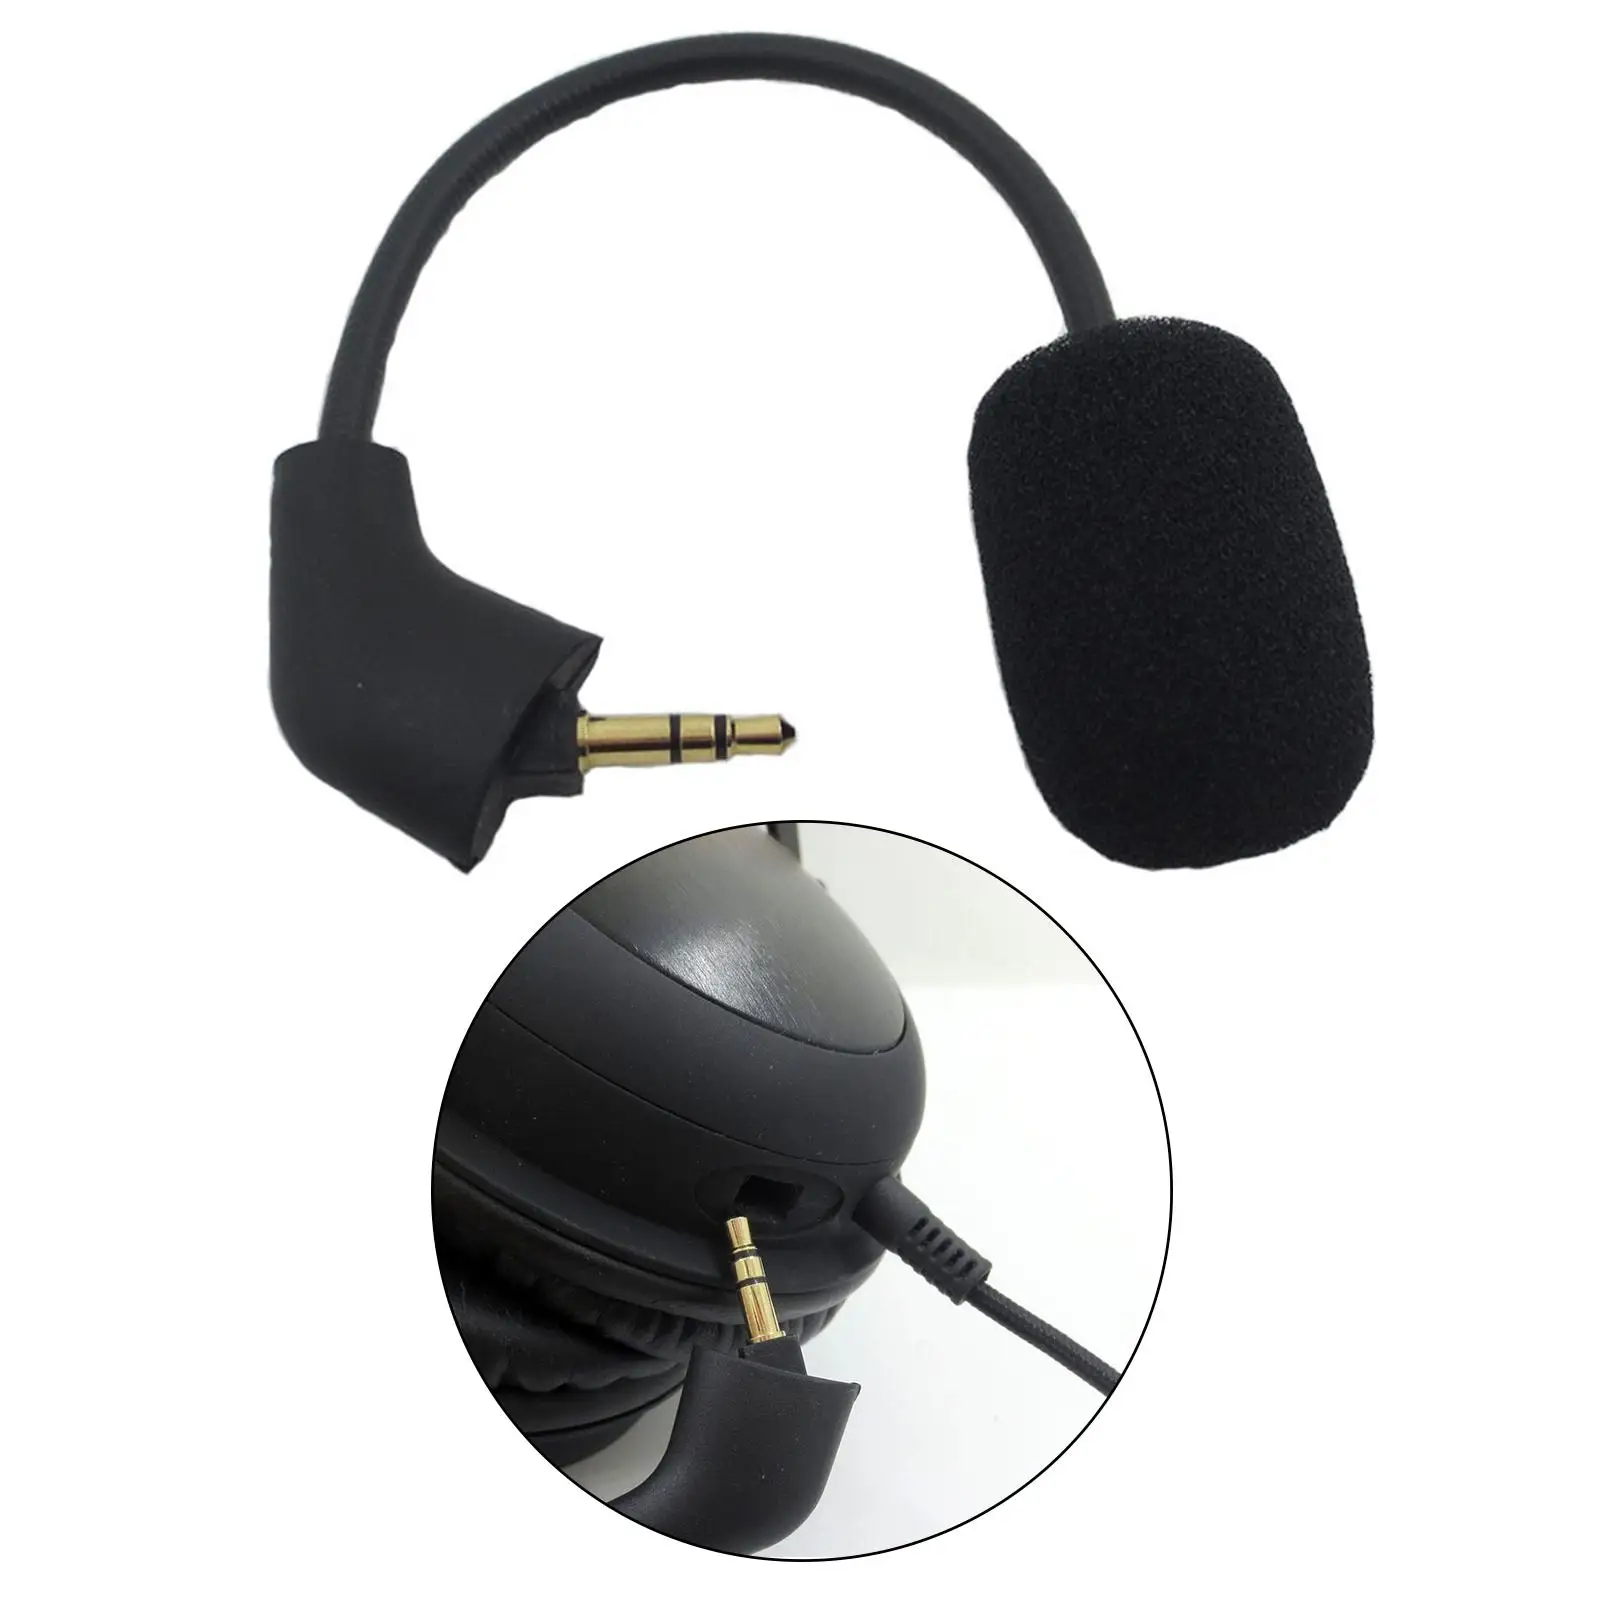  Replacement Detachable Gaming Headset 17cm Length with Foam Cover Bendable - Copper Plug  Tomahawk